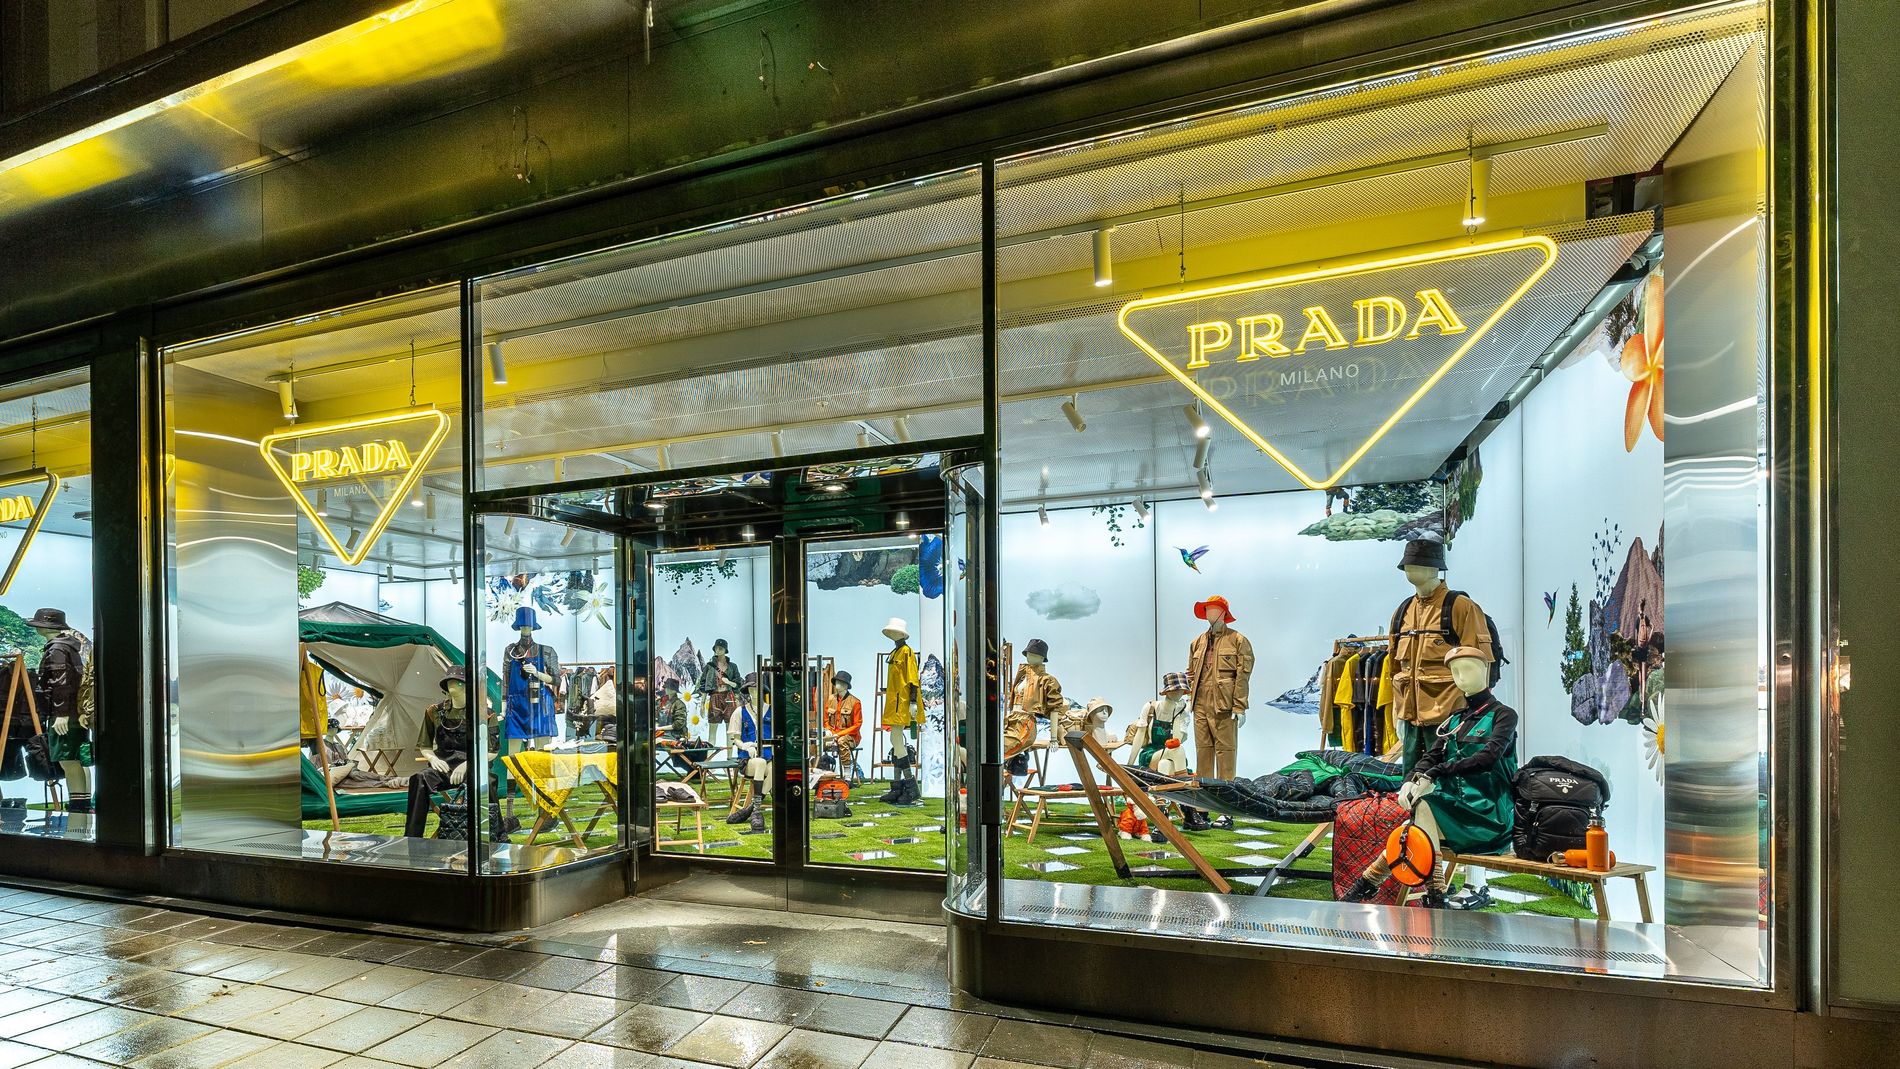 Prada's new Stockholm pop-up store is a must-go this autumn